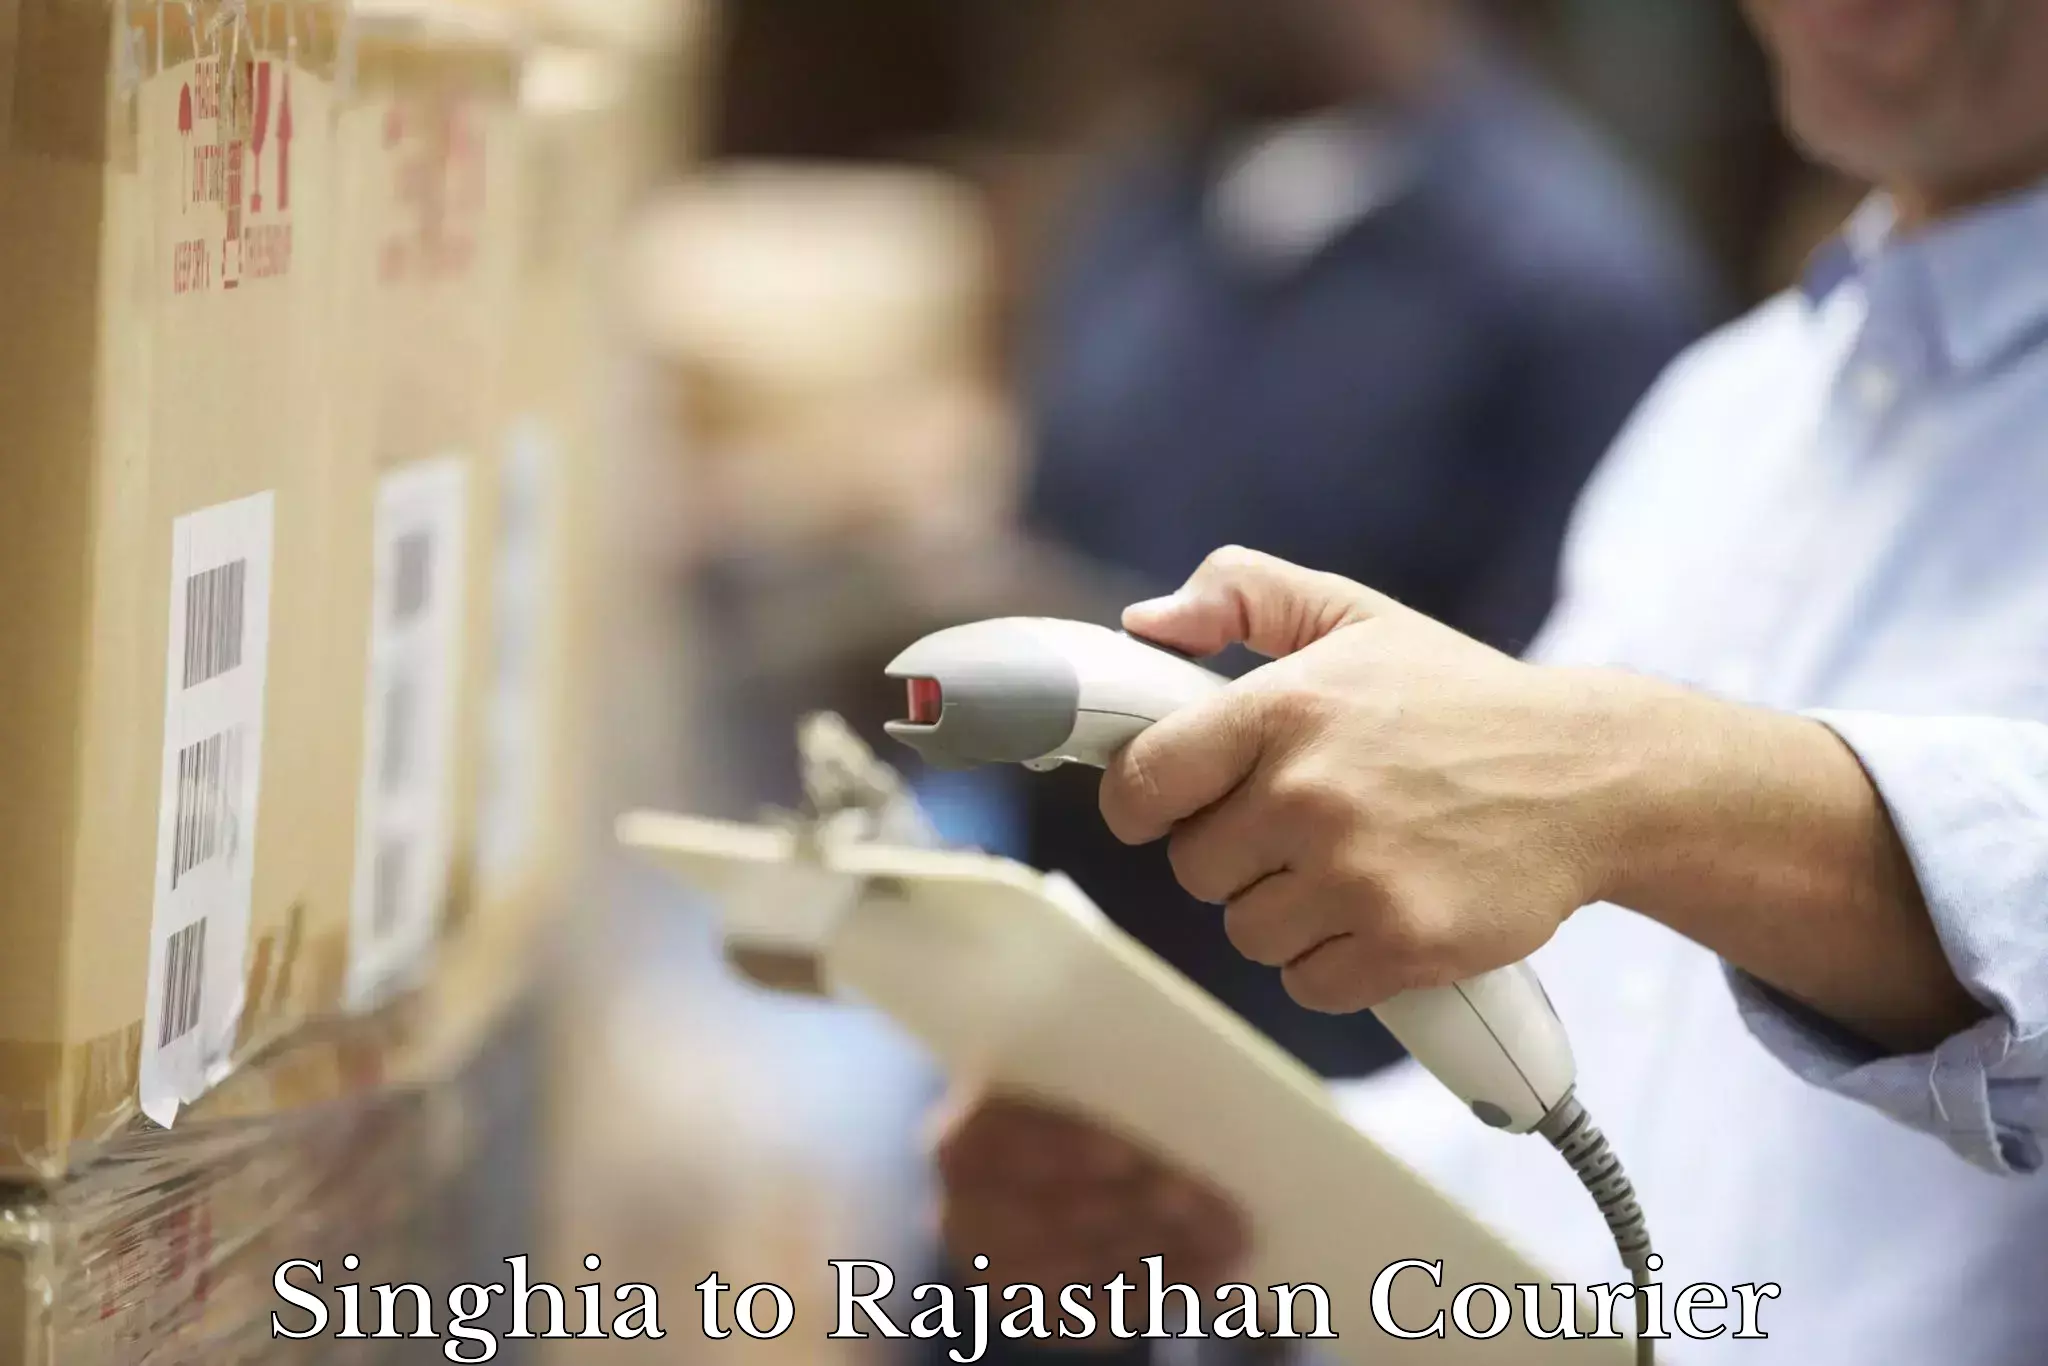 Bulk courier orders Singhia to Udaipur